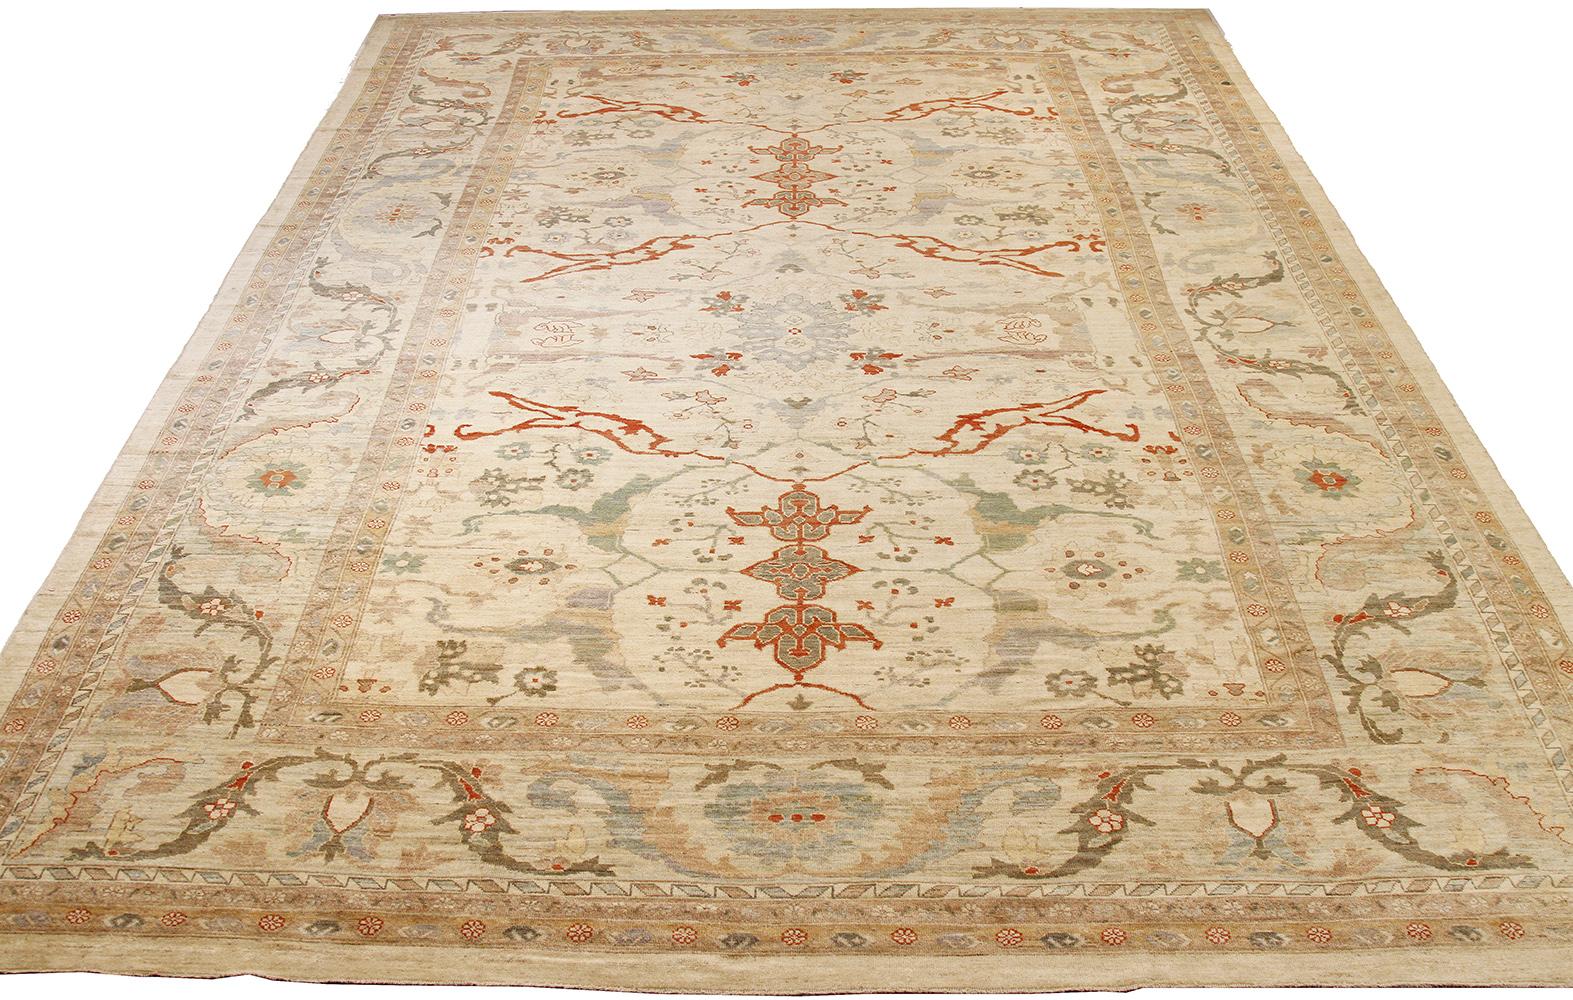 New handmade Persian style area rug from high-quality sheep’s wool and colored with eco-friendly vegetable dyes that are proven safe for humans and pets alike. It’s a Classic Sultanabad design showcasing an ivory field with prominent Herati flower